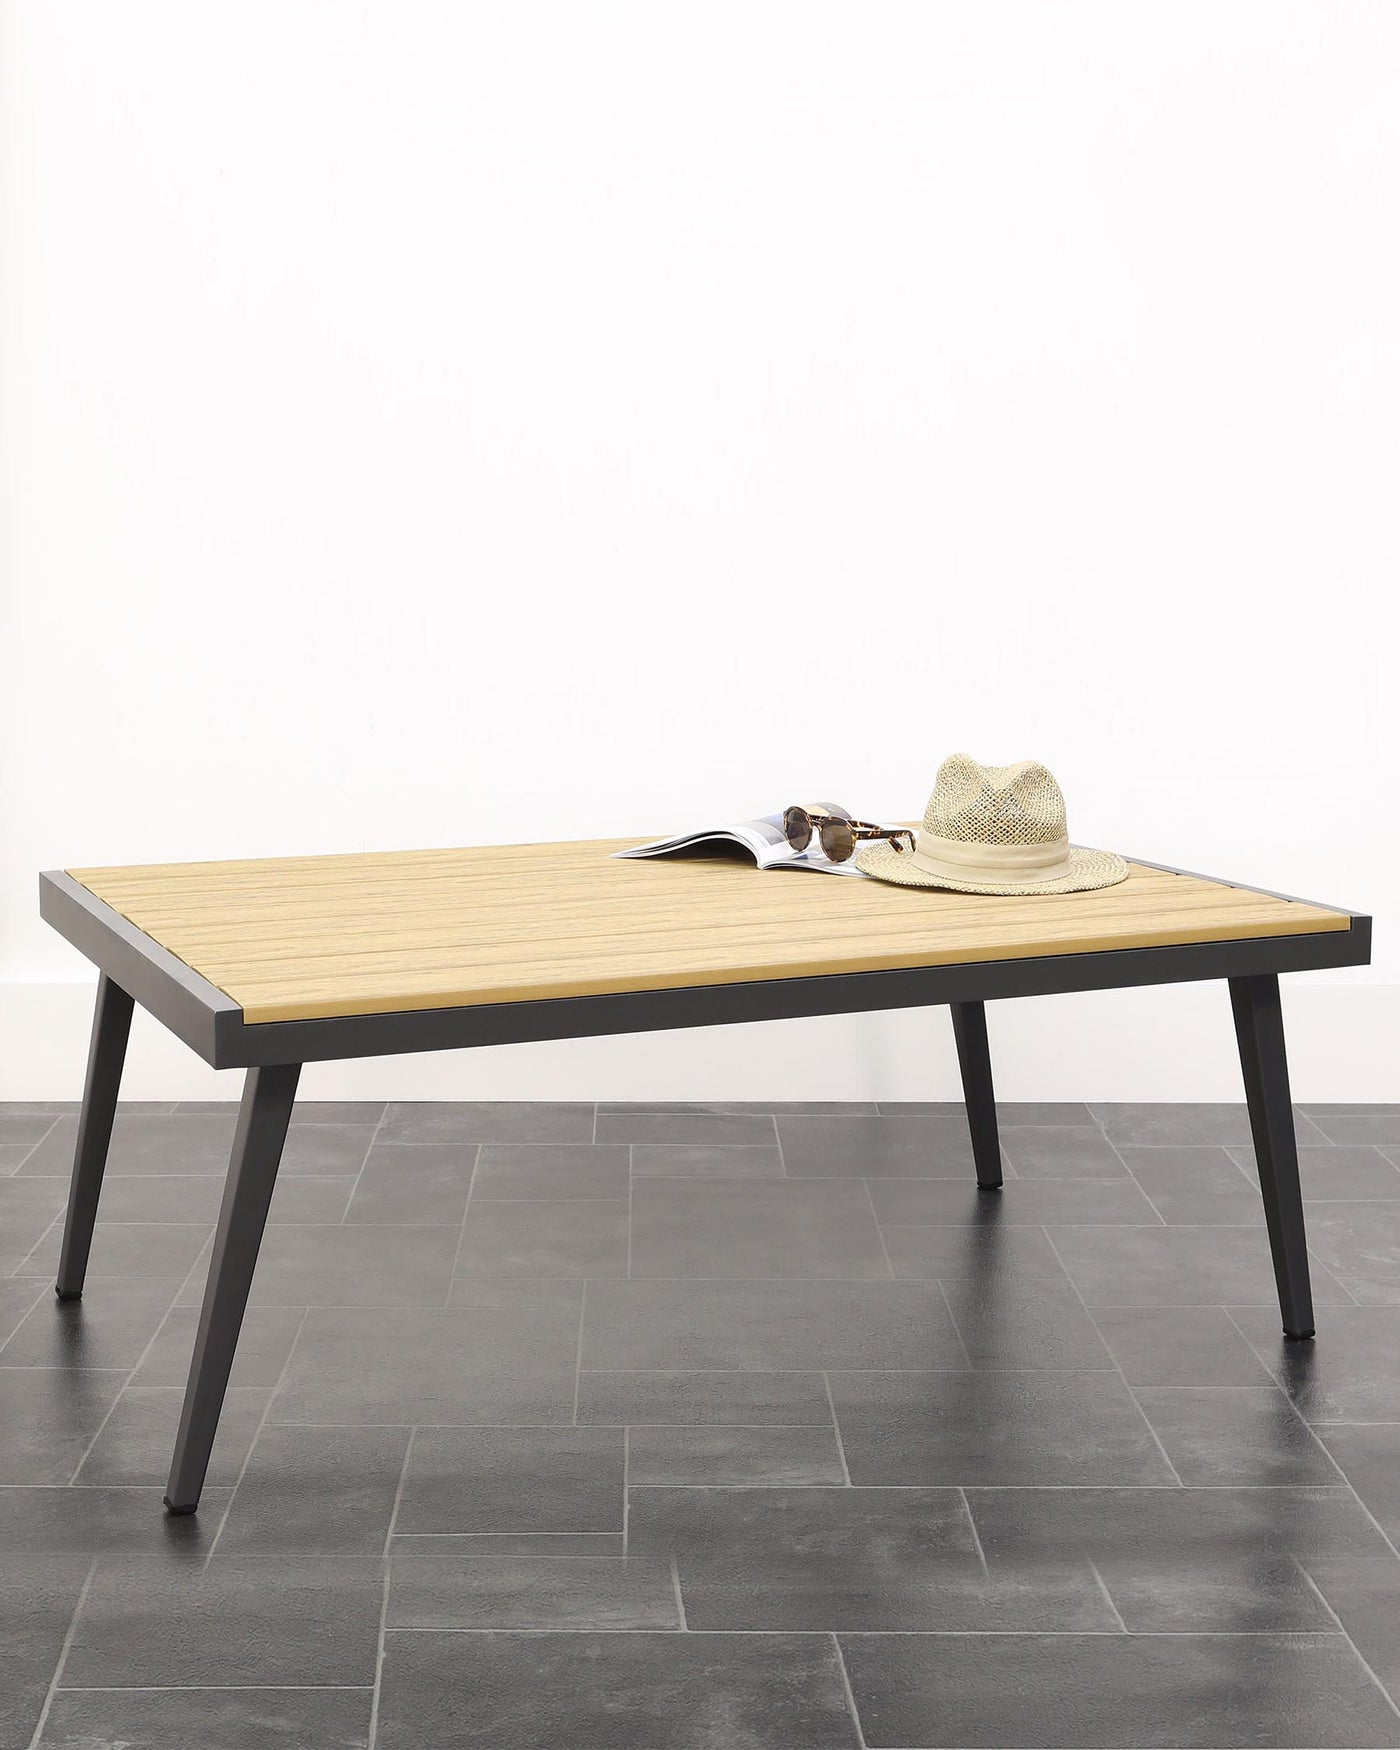 A modern rectangular coffee table with a ribbed light wooden tabletop and slender, straight metal legs in a matte black finish. The table is adorned with a casual straw hat and a pair of sunglasses resting atop an open magazine. The furniture piece is set against a neutral background with grey floor tiles.